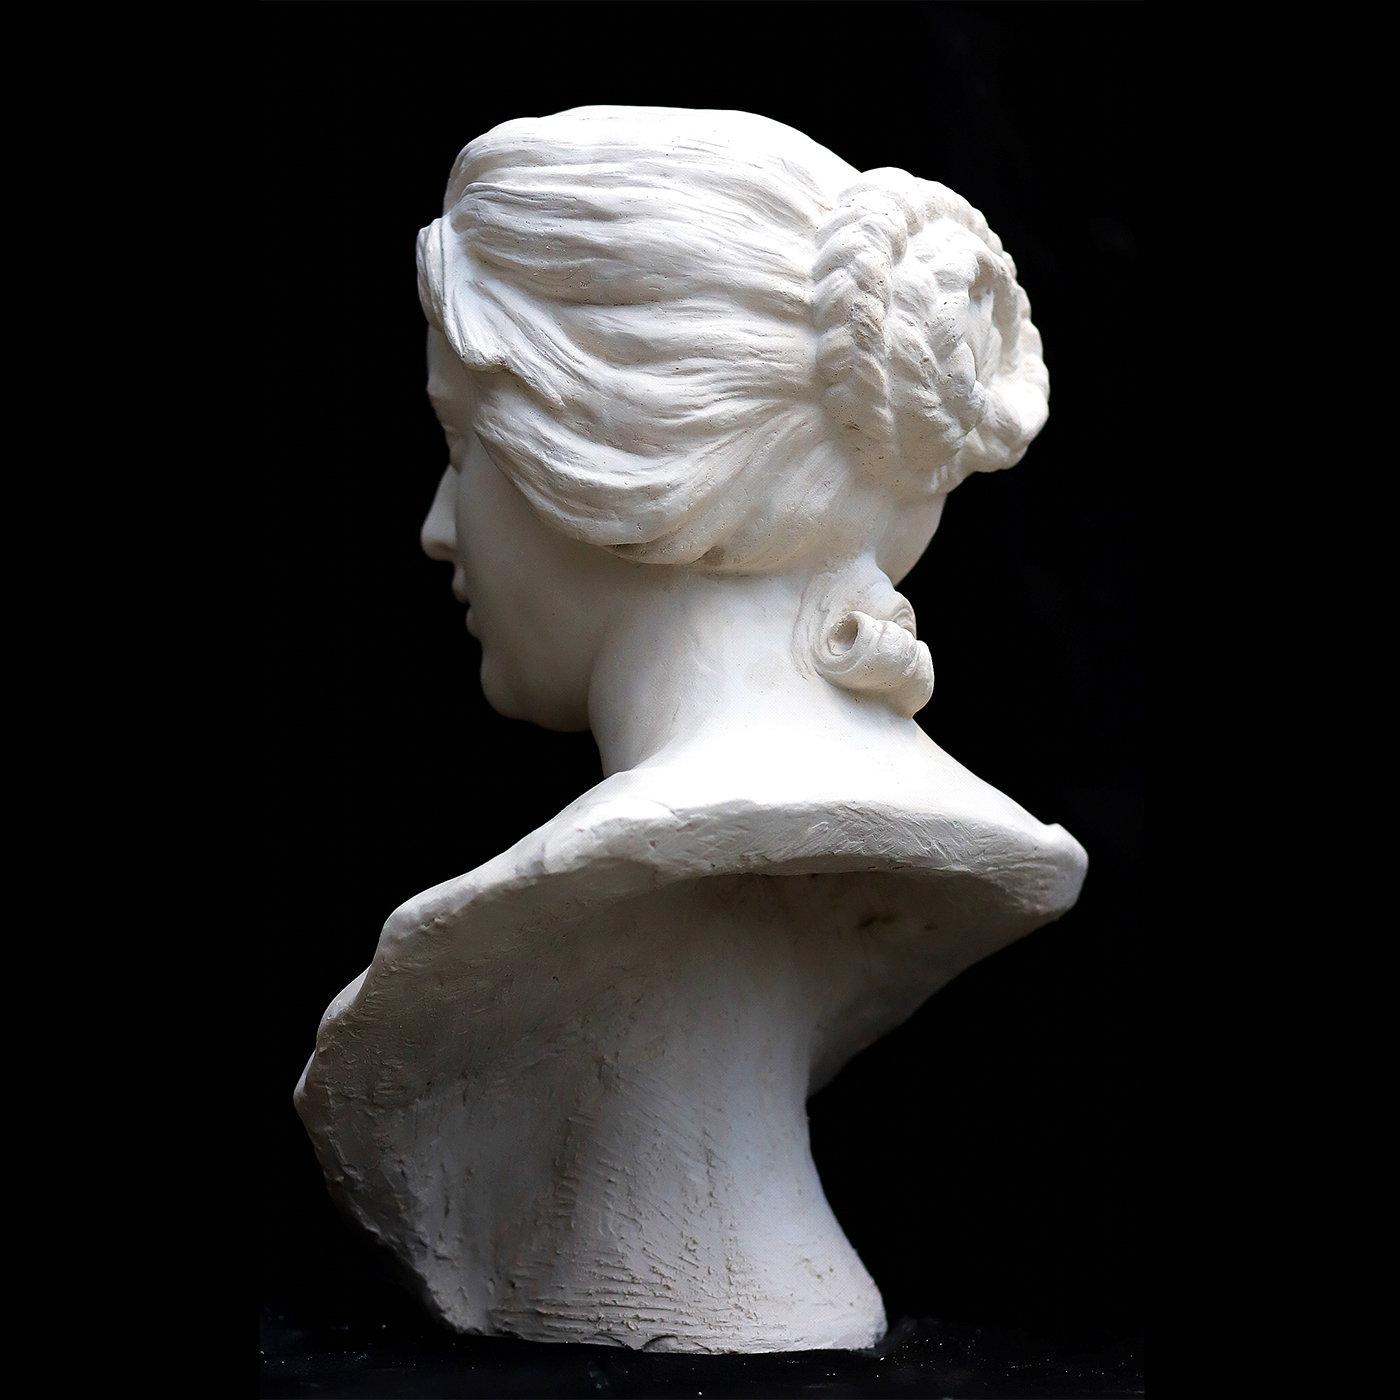 Handcrafted by artists from the Florence-based Romanelli Gallery, this plaster bust depicts Costanza Bonarelli, an Italian noblewoman and merchant famous for having been a subject of Bernini's paintings. Adding instant elegance and sophistication to